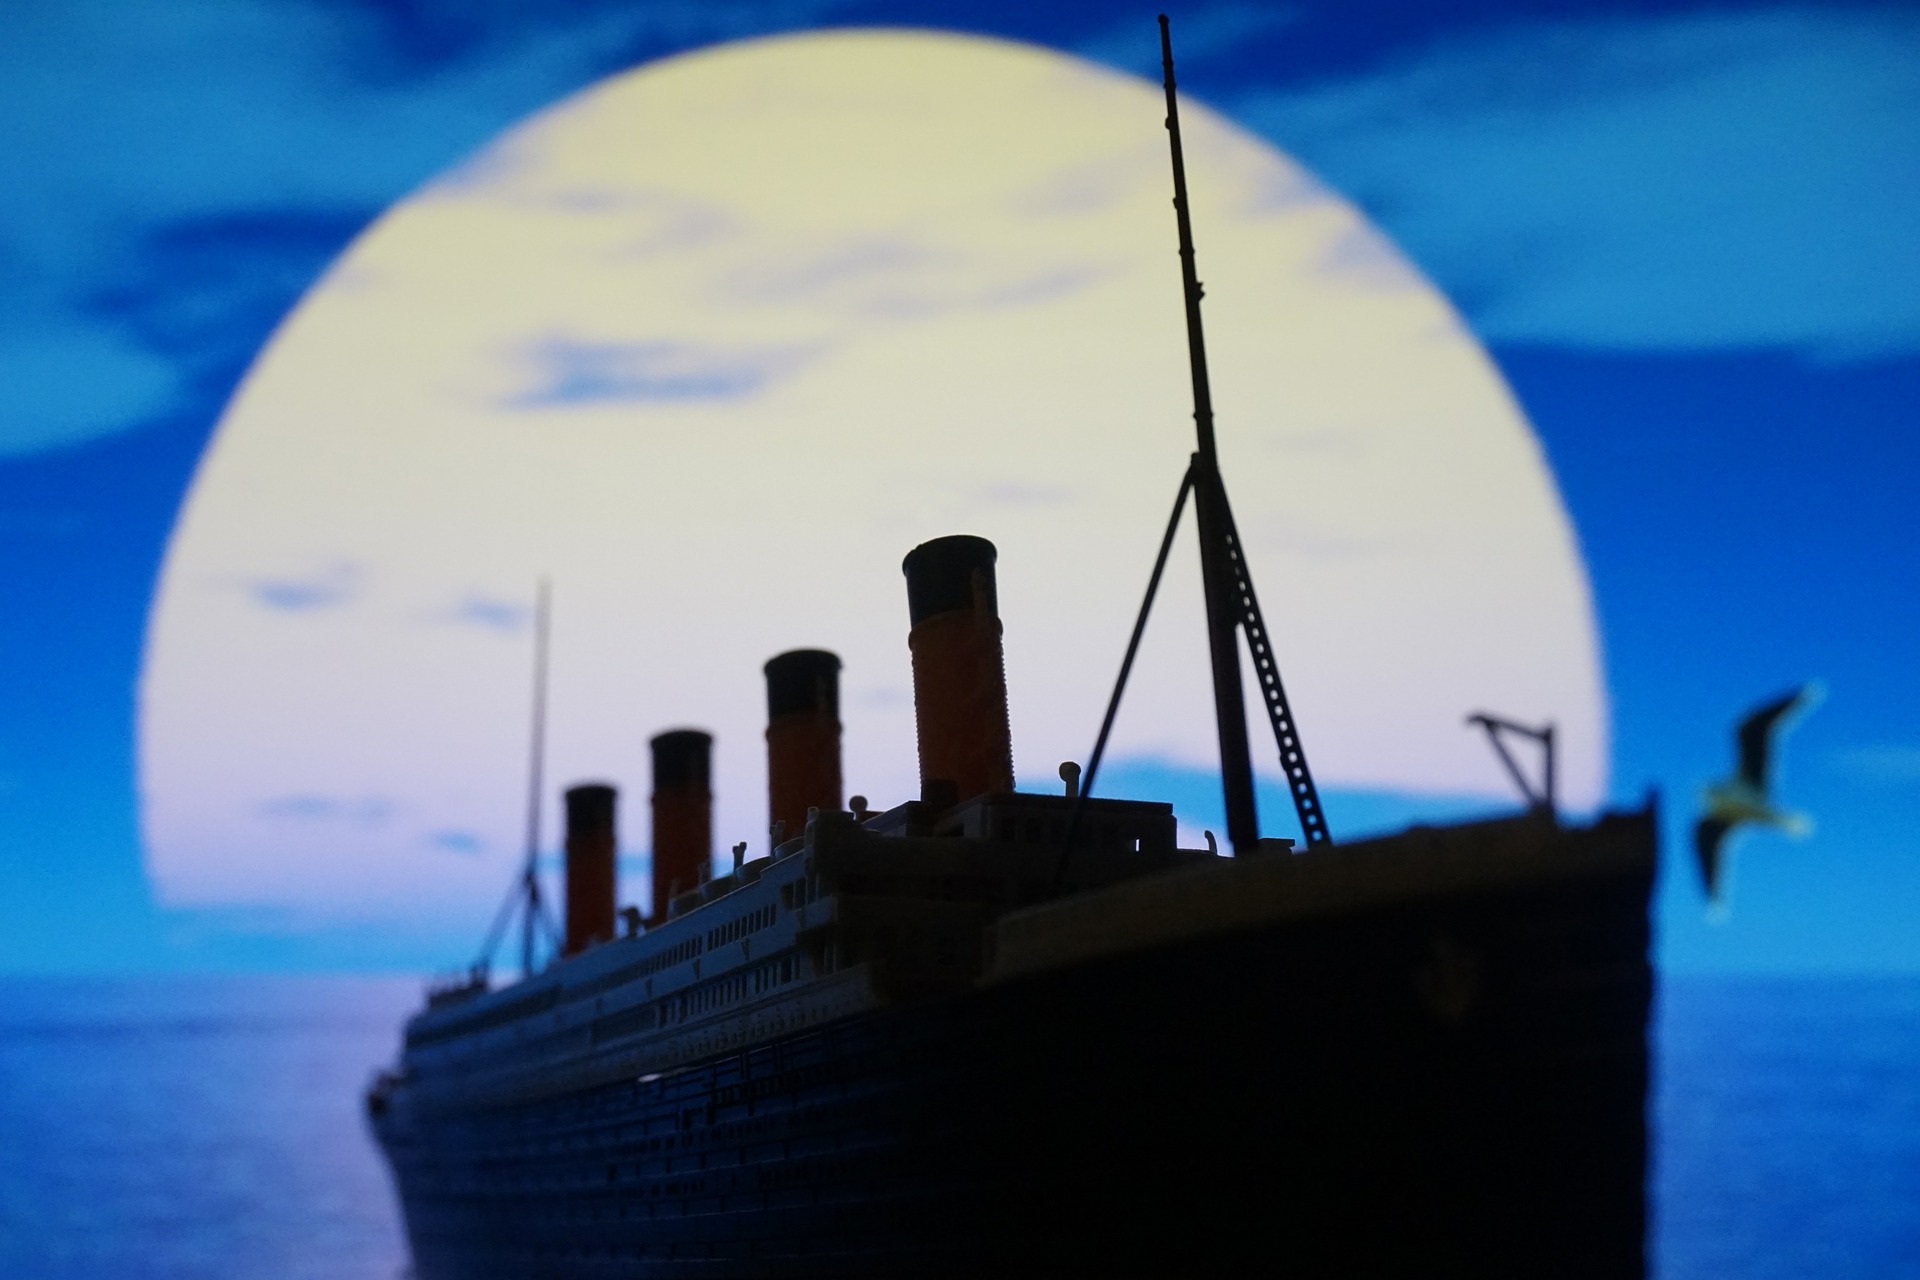 Titanic ship outlined against a large moon in blue sky